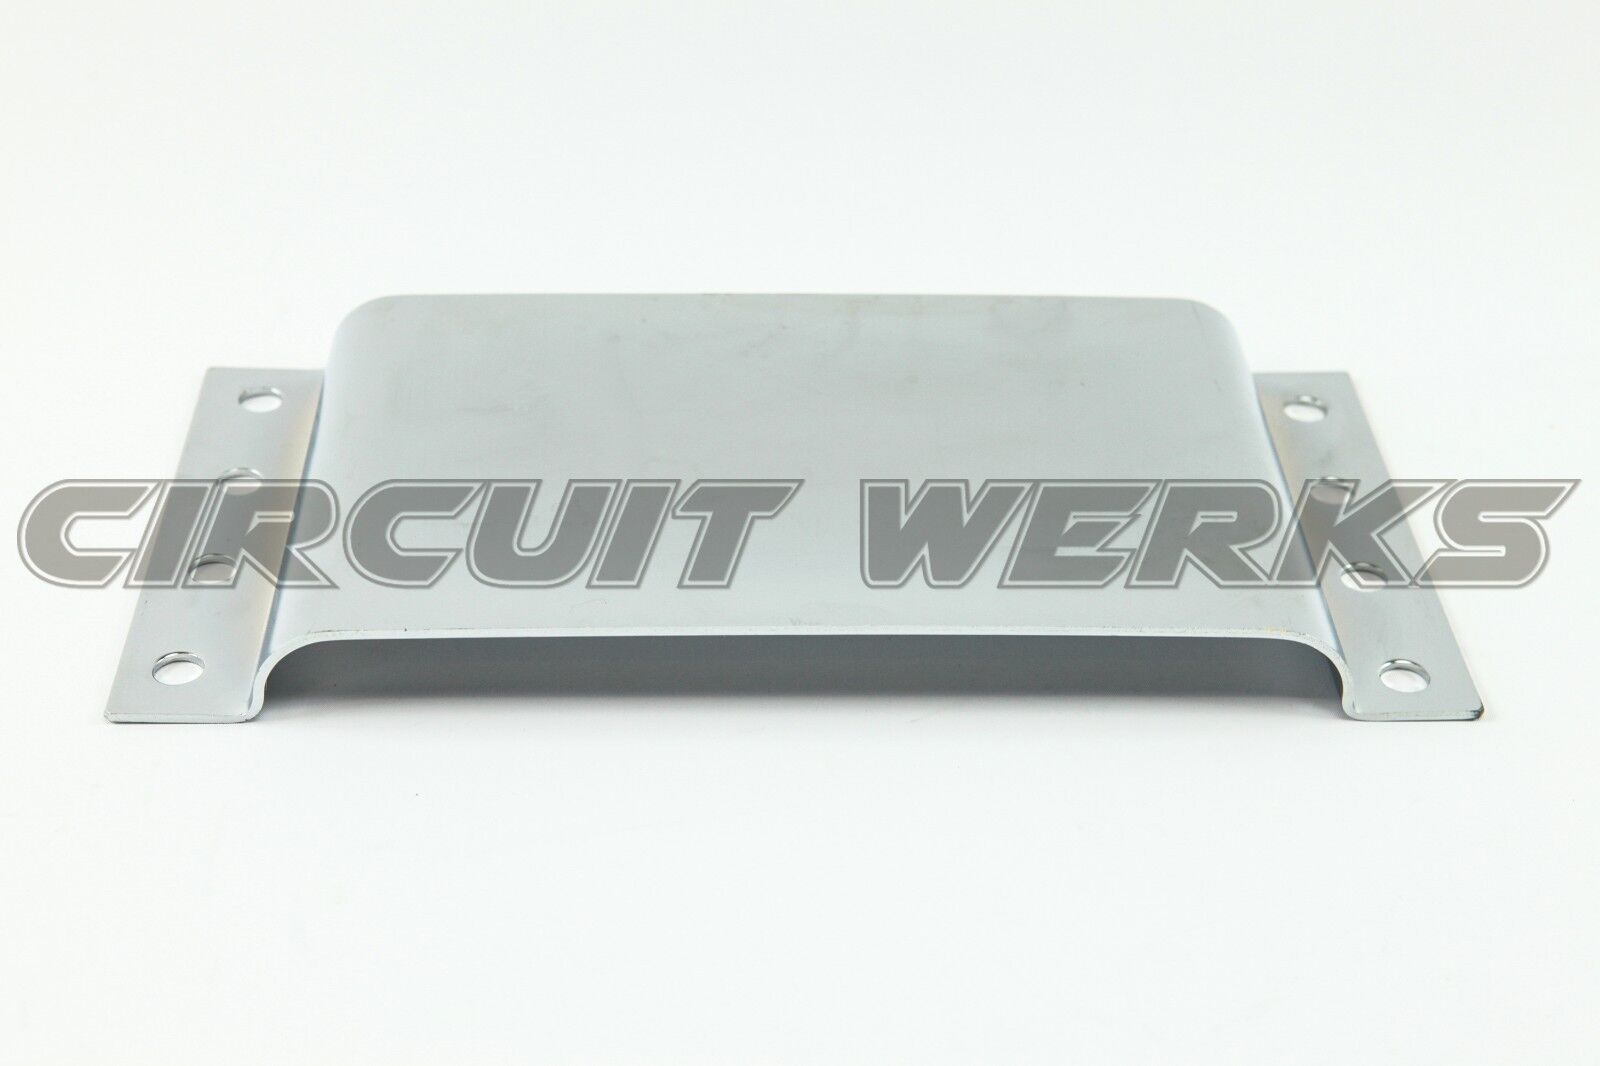 E93 Circuit Werks Bmw 335i Chassis Brace For Aftermarket Exhaust Catback Systems